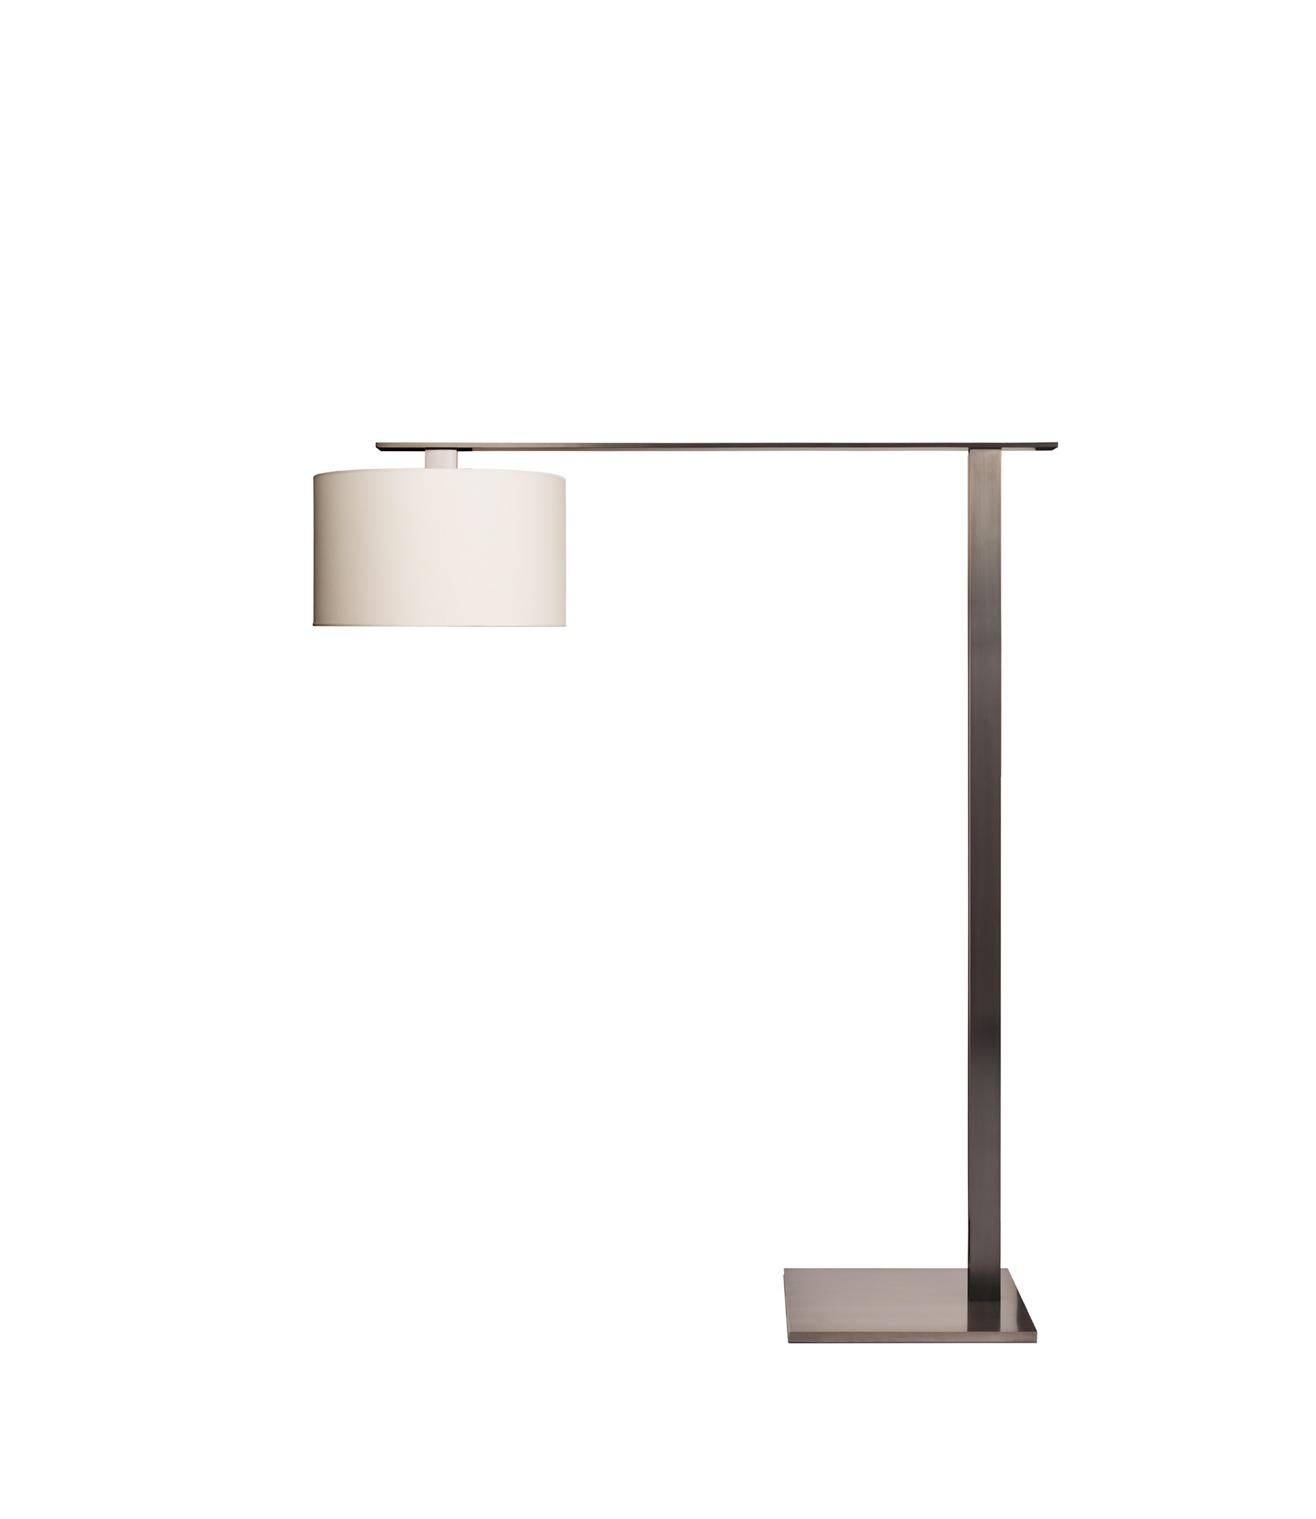 Atol floor lamp by LK Edition
Dimensions: L 143, l 30, H 170 cm
Materials: Patinated brass

It is with the sense of detail and requirement, this research of the exception by the selection of noble materials and his culture of the French